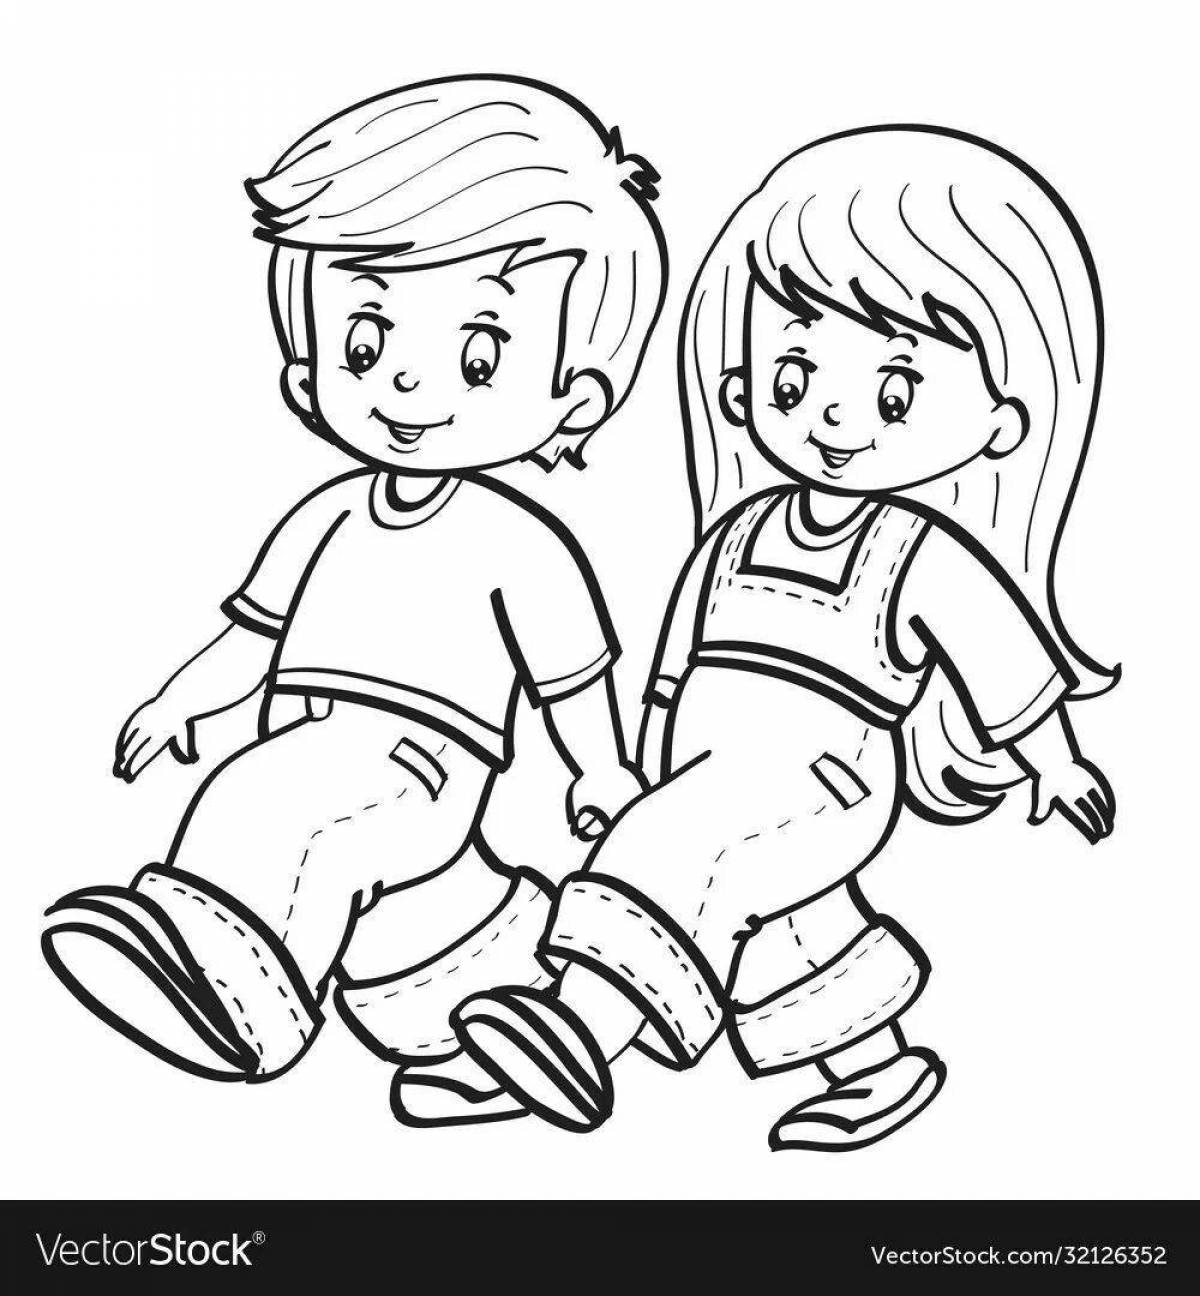 Coloring page loving boy and girl holding hands